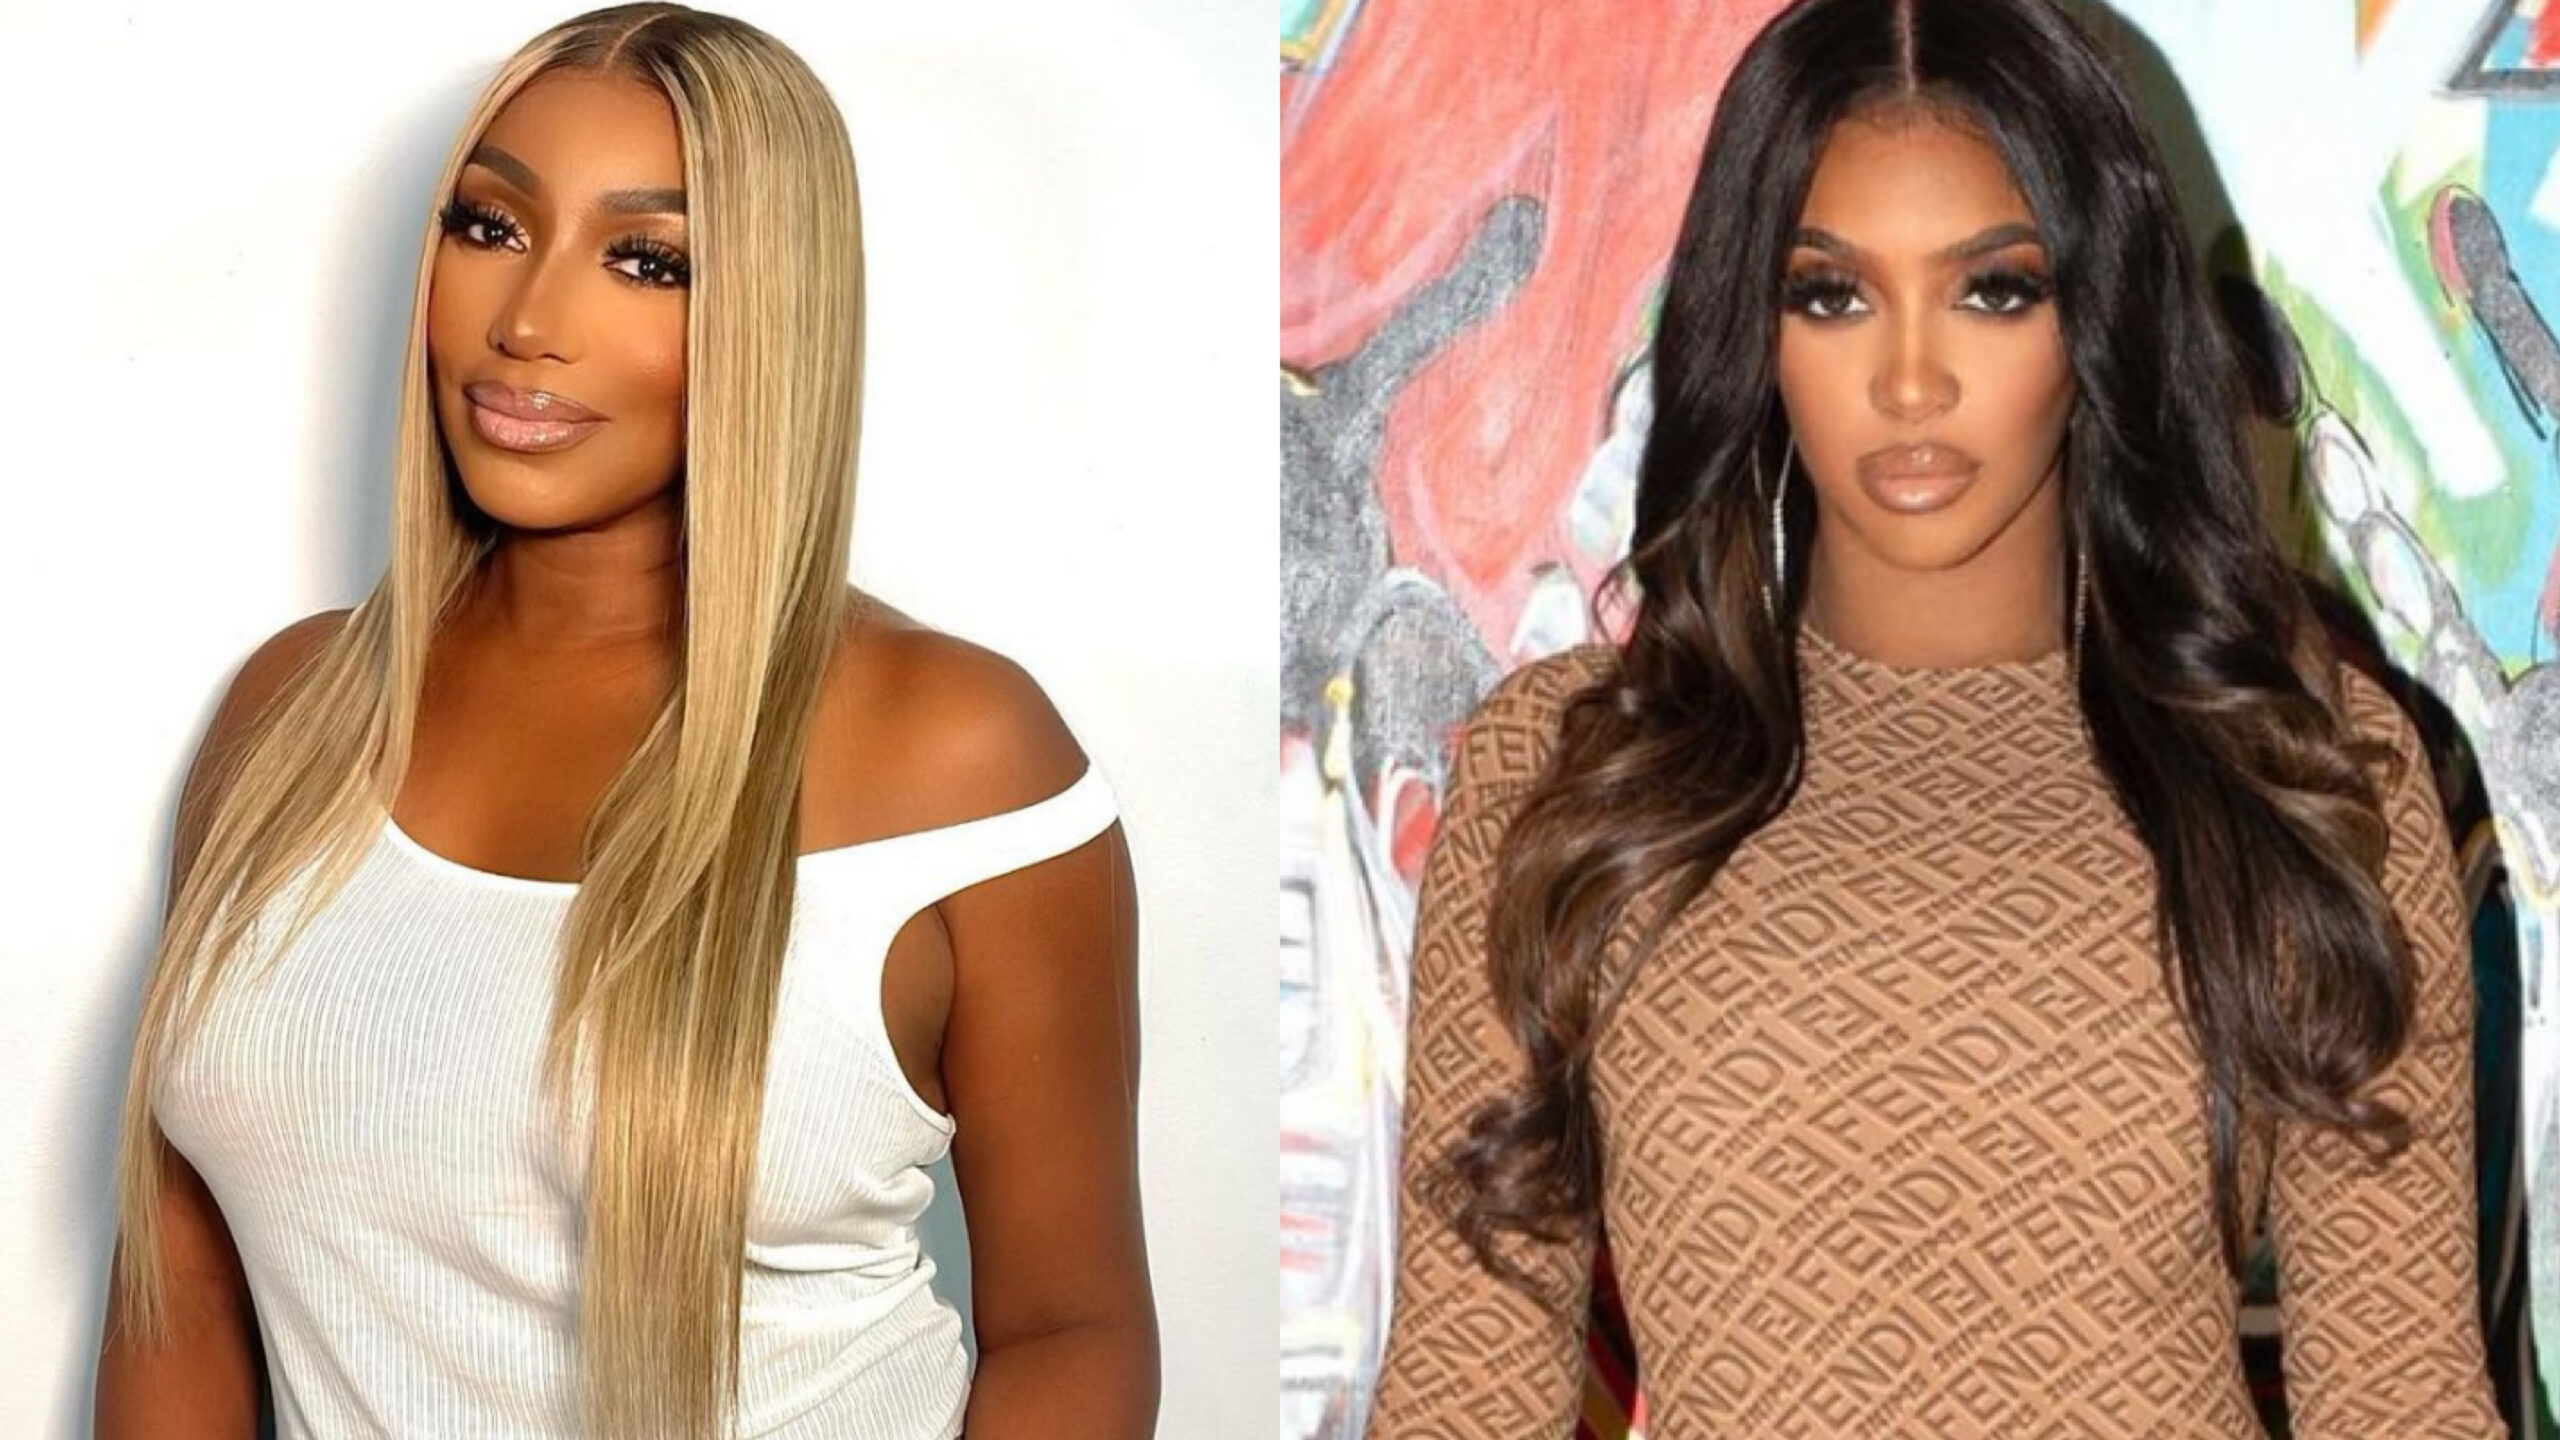 Nene Leakes and Porsha Williams Enjoy a Night Out with Their Beaus and Fans Bring Up Simon Guobadia's and Nyonisela Sioh's Failed Marriages 